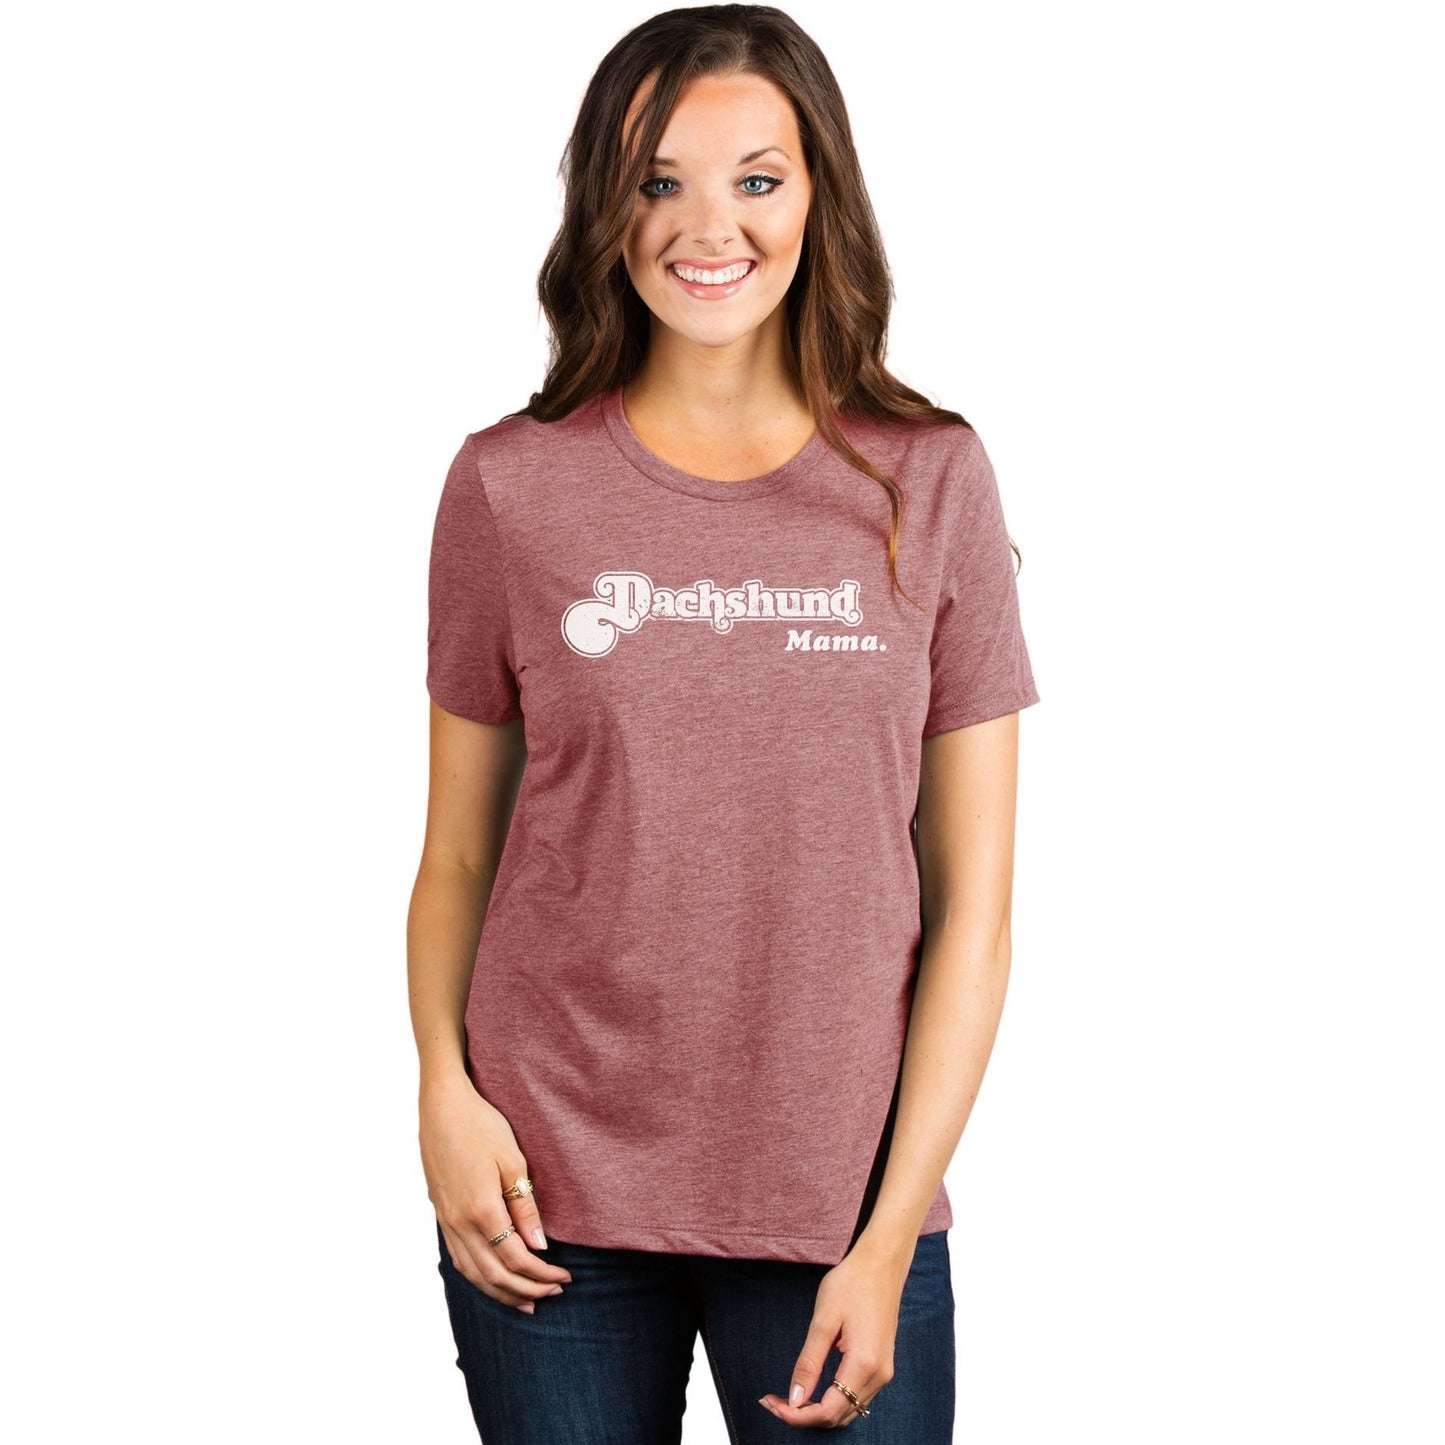 Dachshund Mama Women's Relaxed Crewneck T-Shirt Top Tee Heather Rouge Model
